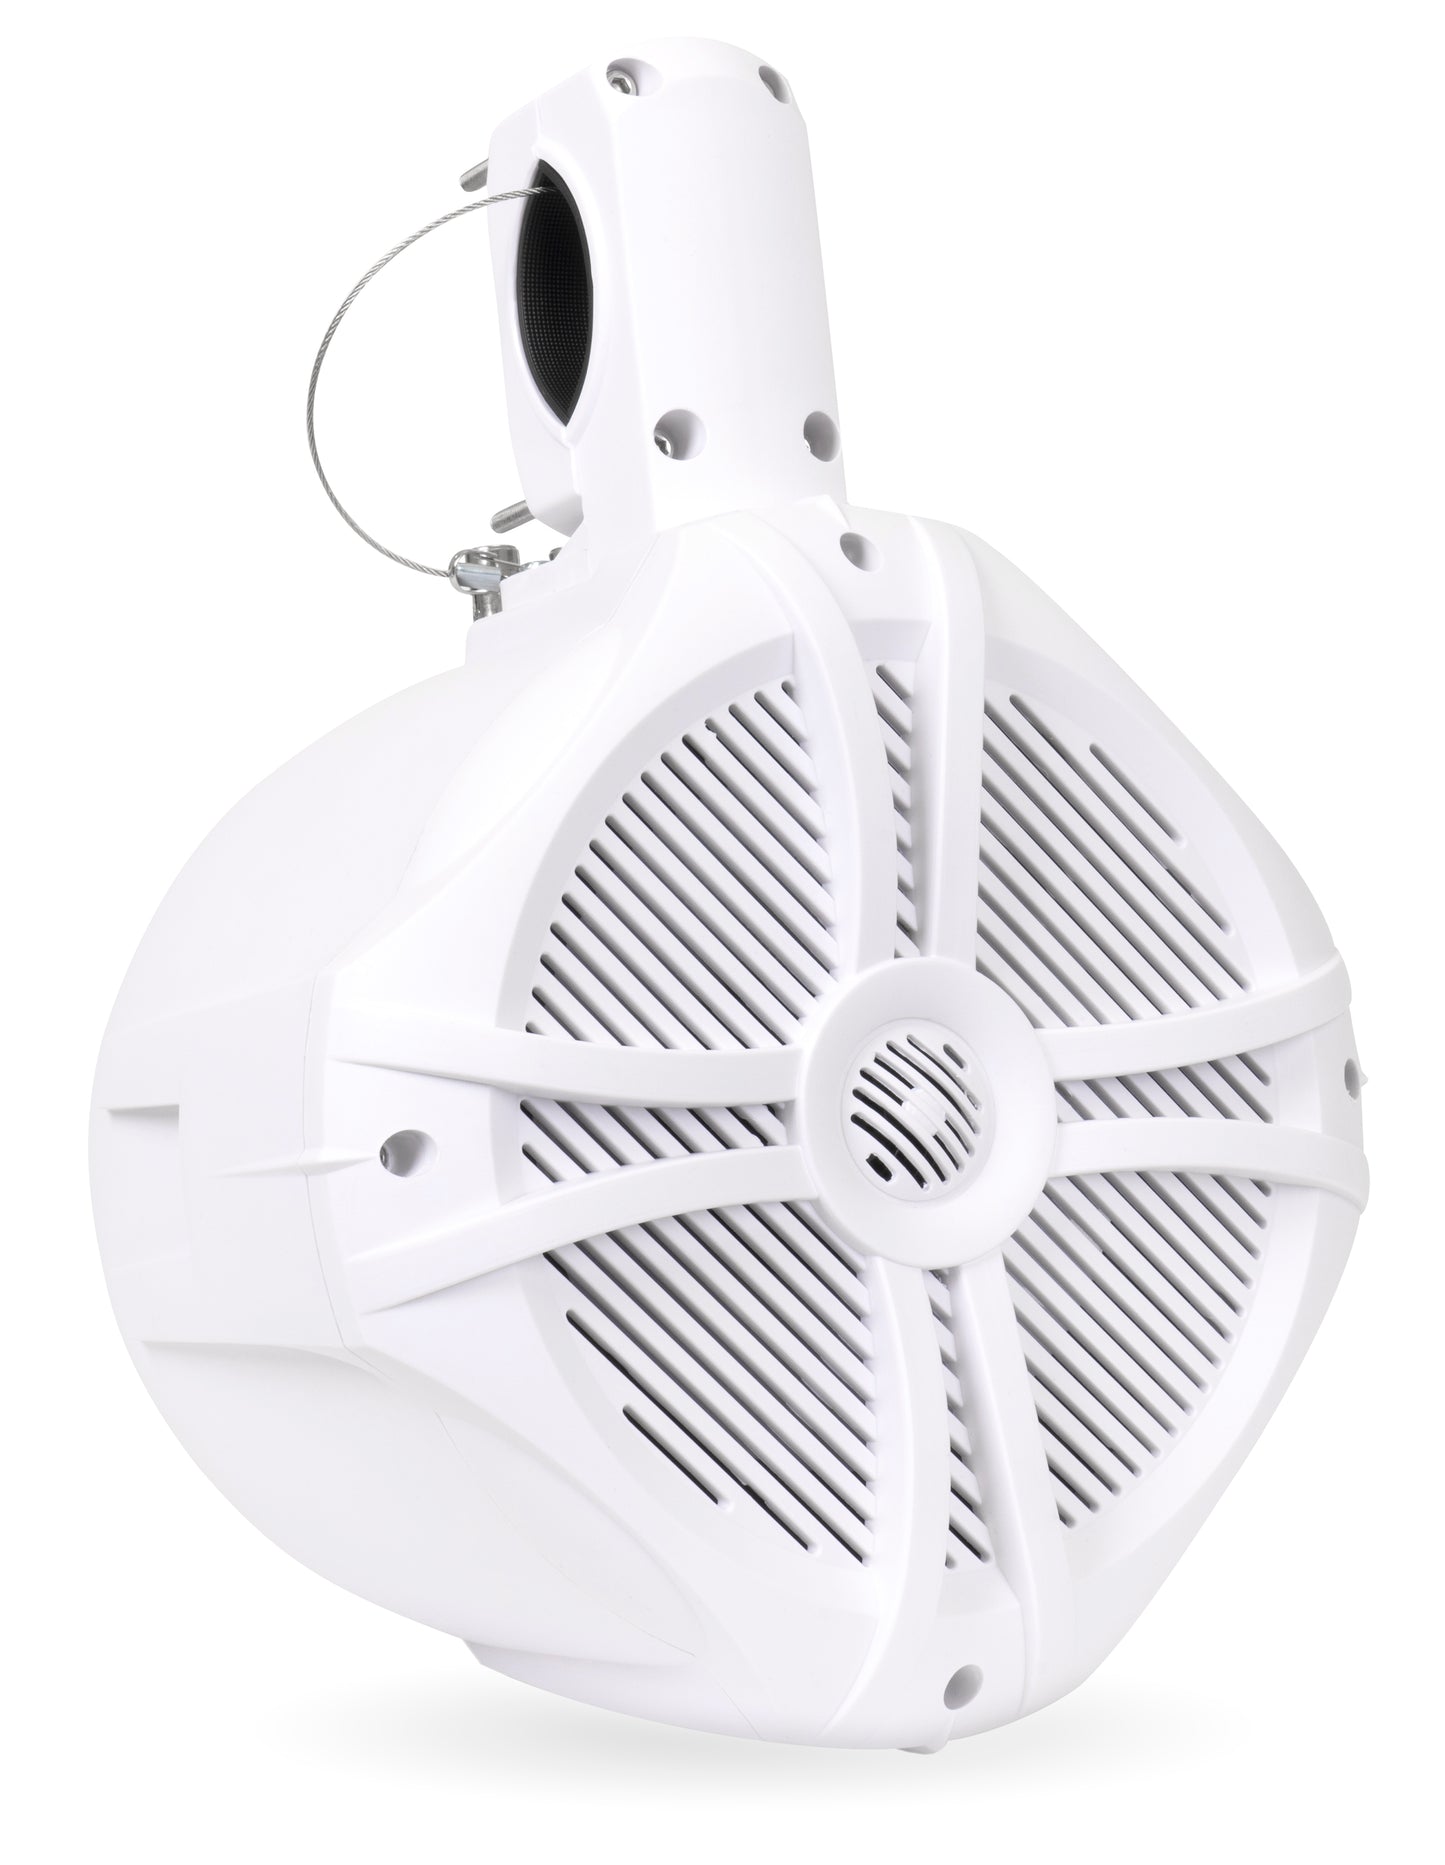 BWT8LED 600W Peak (300W RMS) 8" Marine Tower Speakers with Multi-Color LED Lighting and Remote (White)